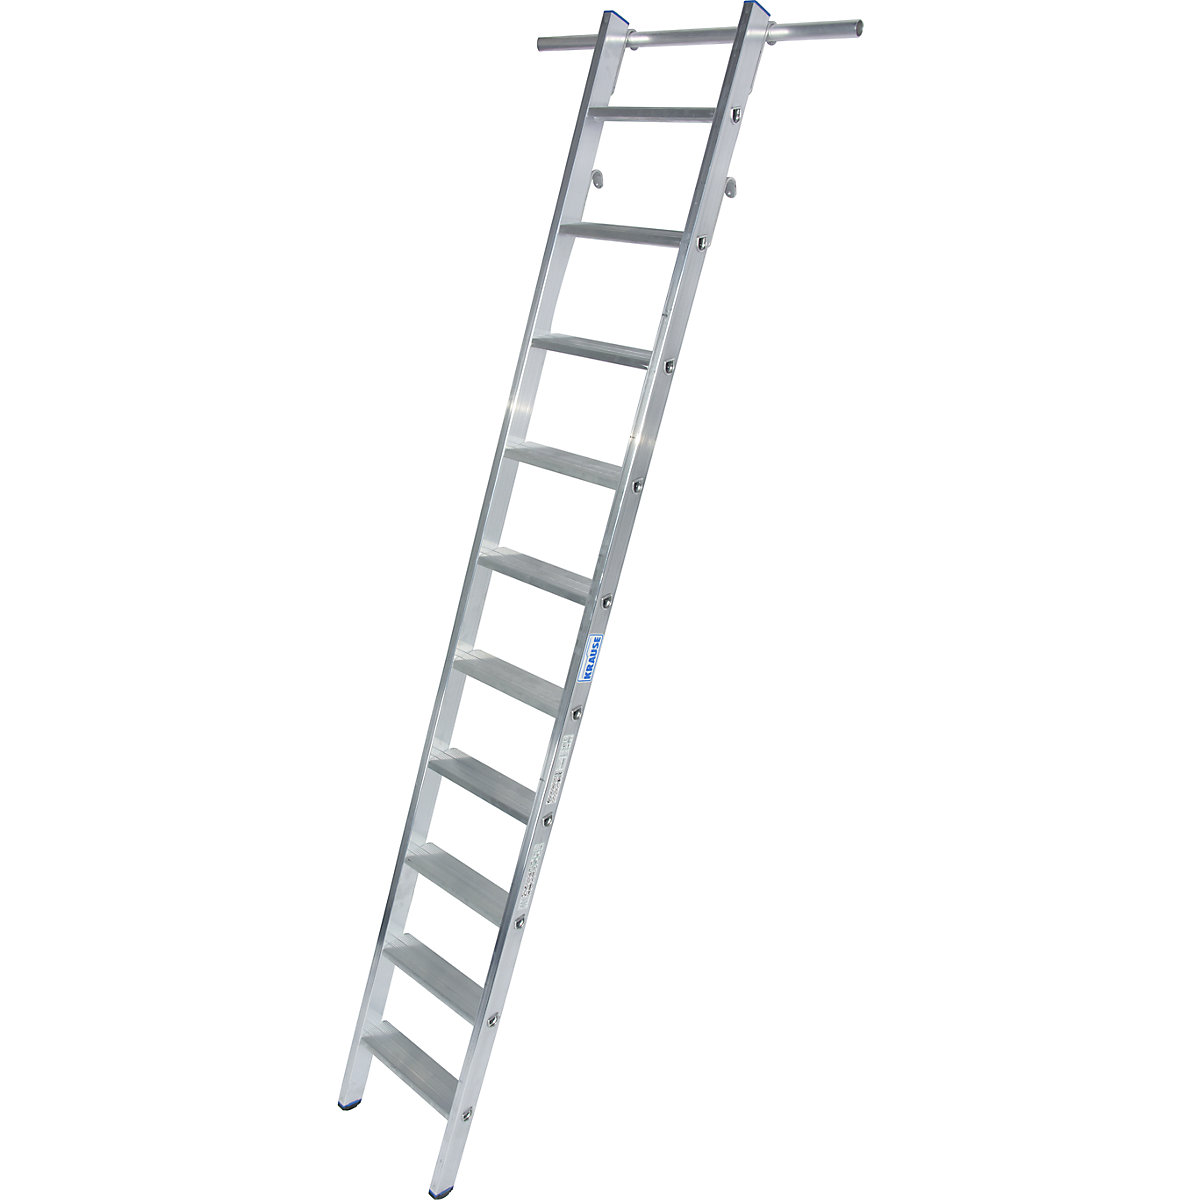 KRAUSE – Step shelf ladder, can be suspended, 2 pairs of suspension hooks, 10 steps